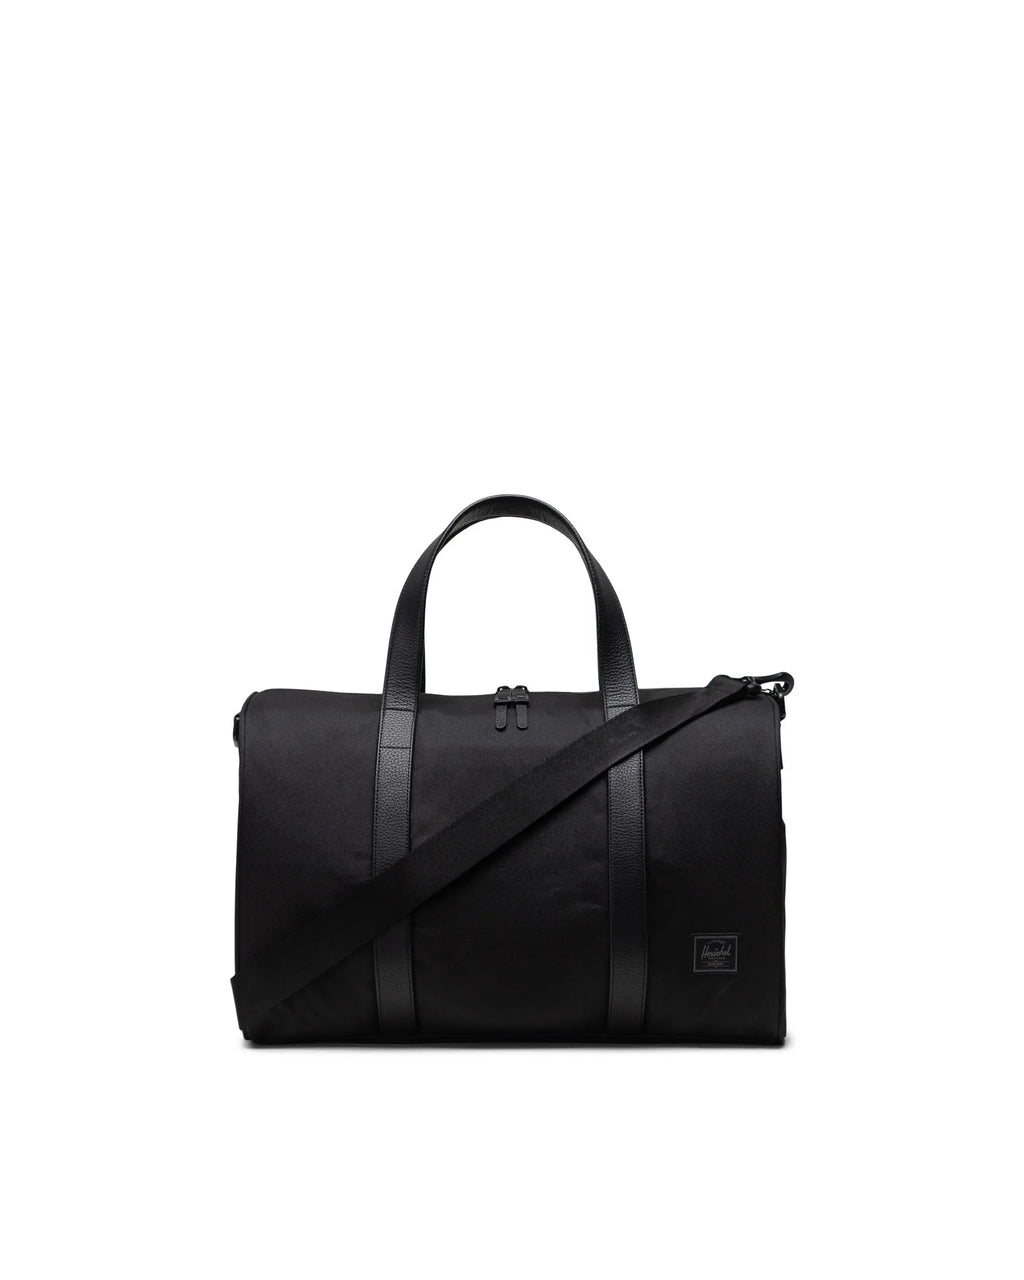 Black carry on size duffle bag.